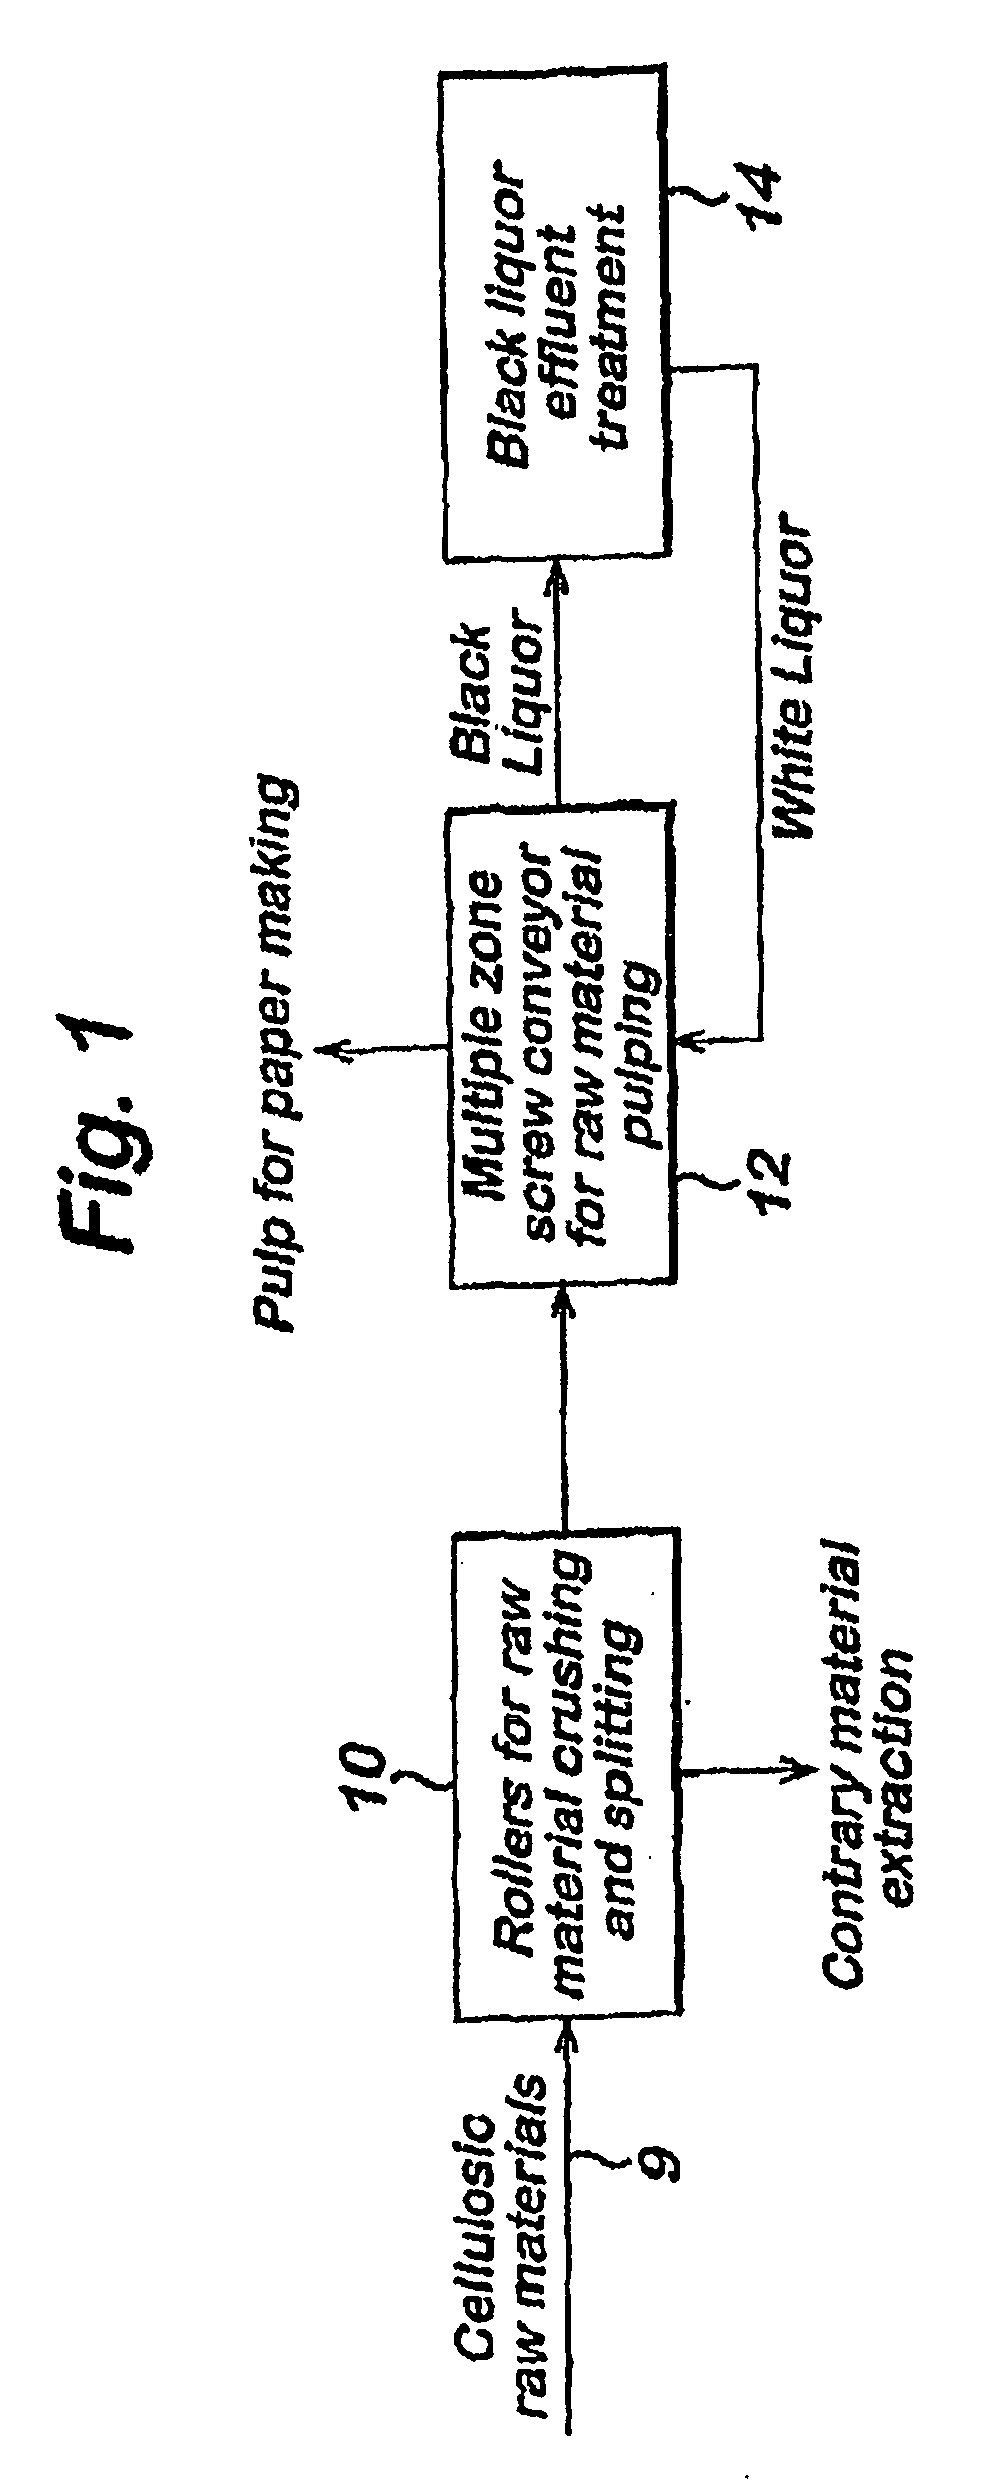 Methods for producing pulp and treating black liquor